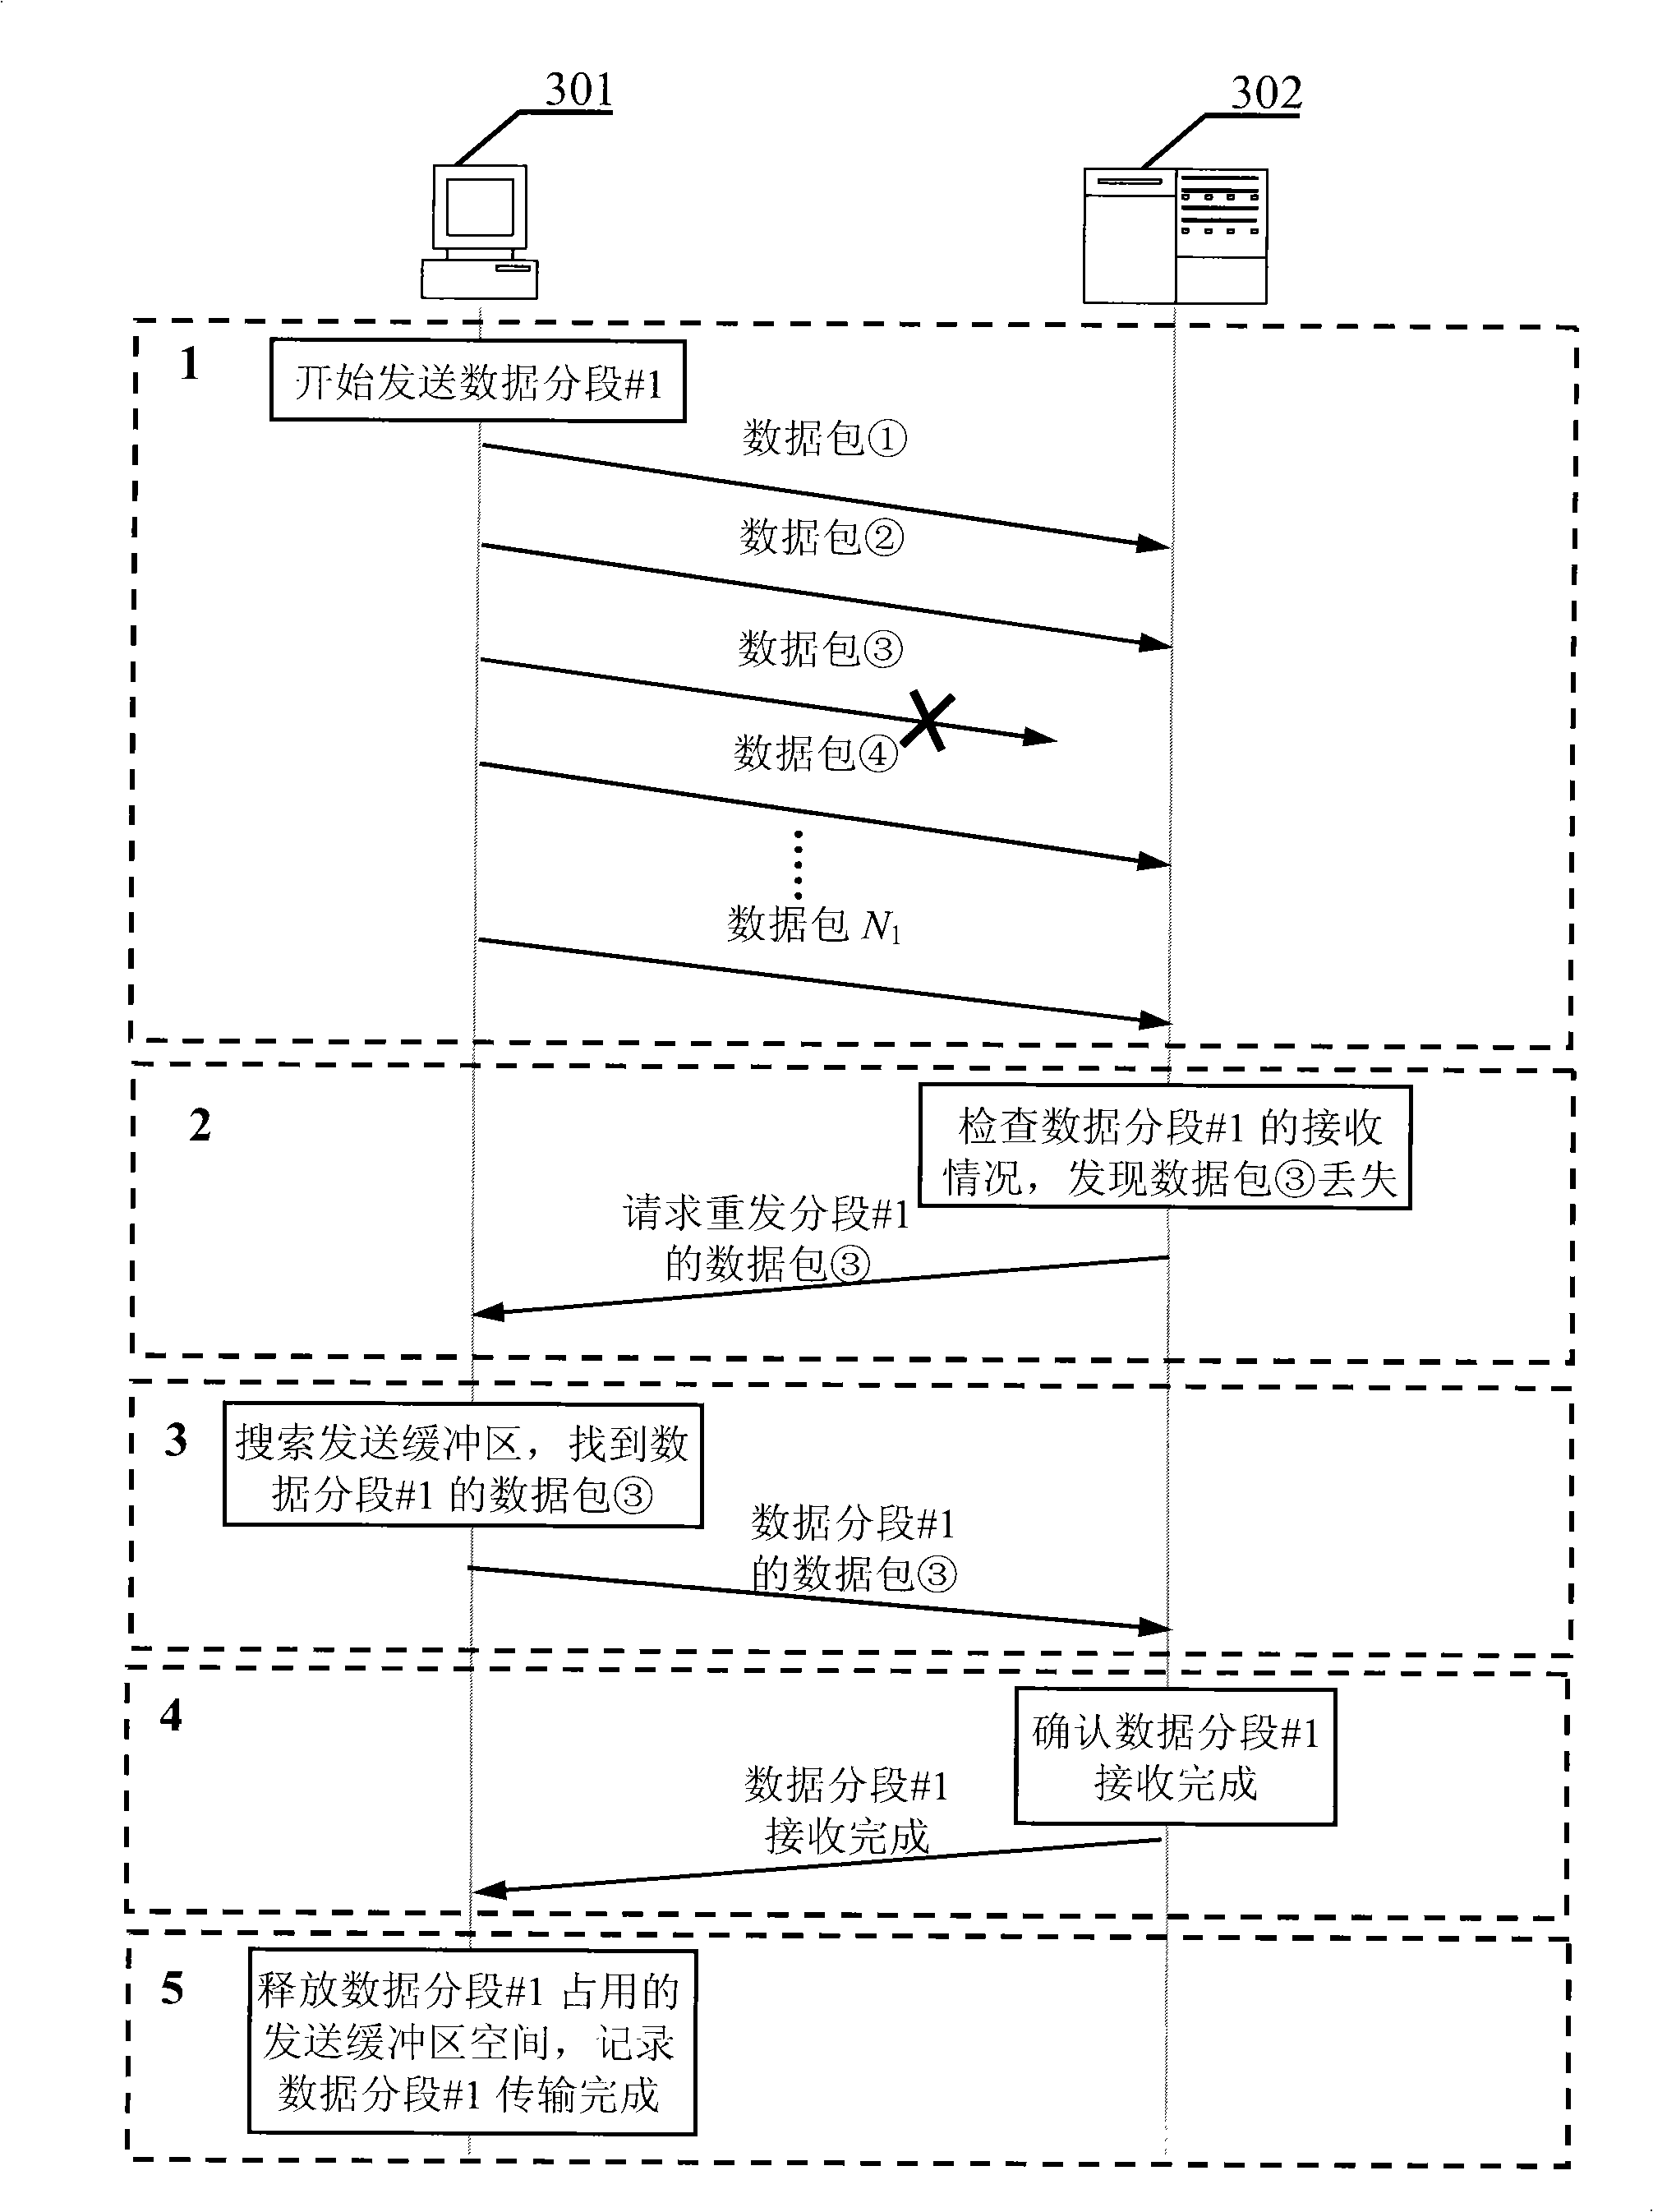 Multimedia data transmission method of concurrent access of multiple threads